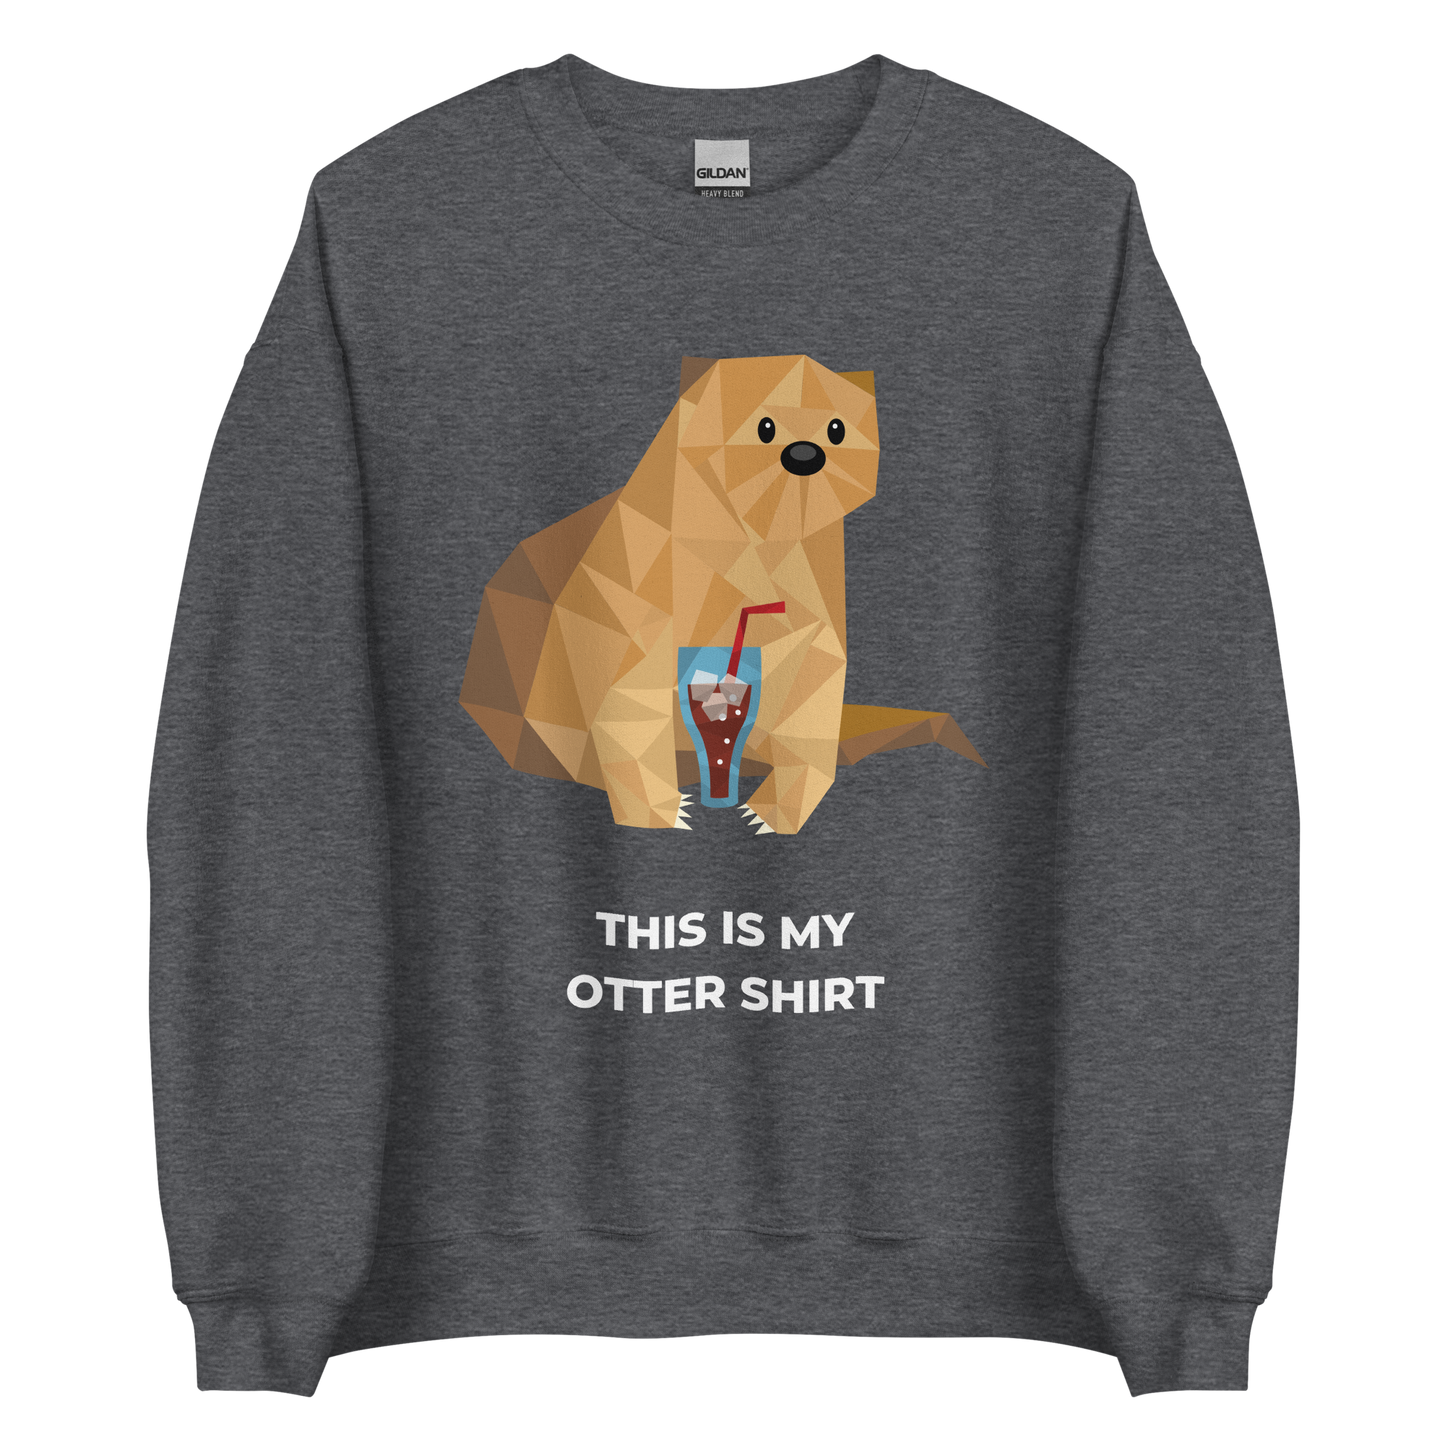 Dark Heather Otter Sweatshirt featuring an adorable This Is My Otter Shirt graphic on the chest - Funny Graphic Otter Sweatshirts - Boozy Fox